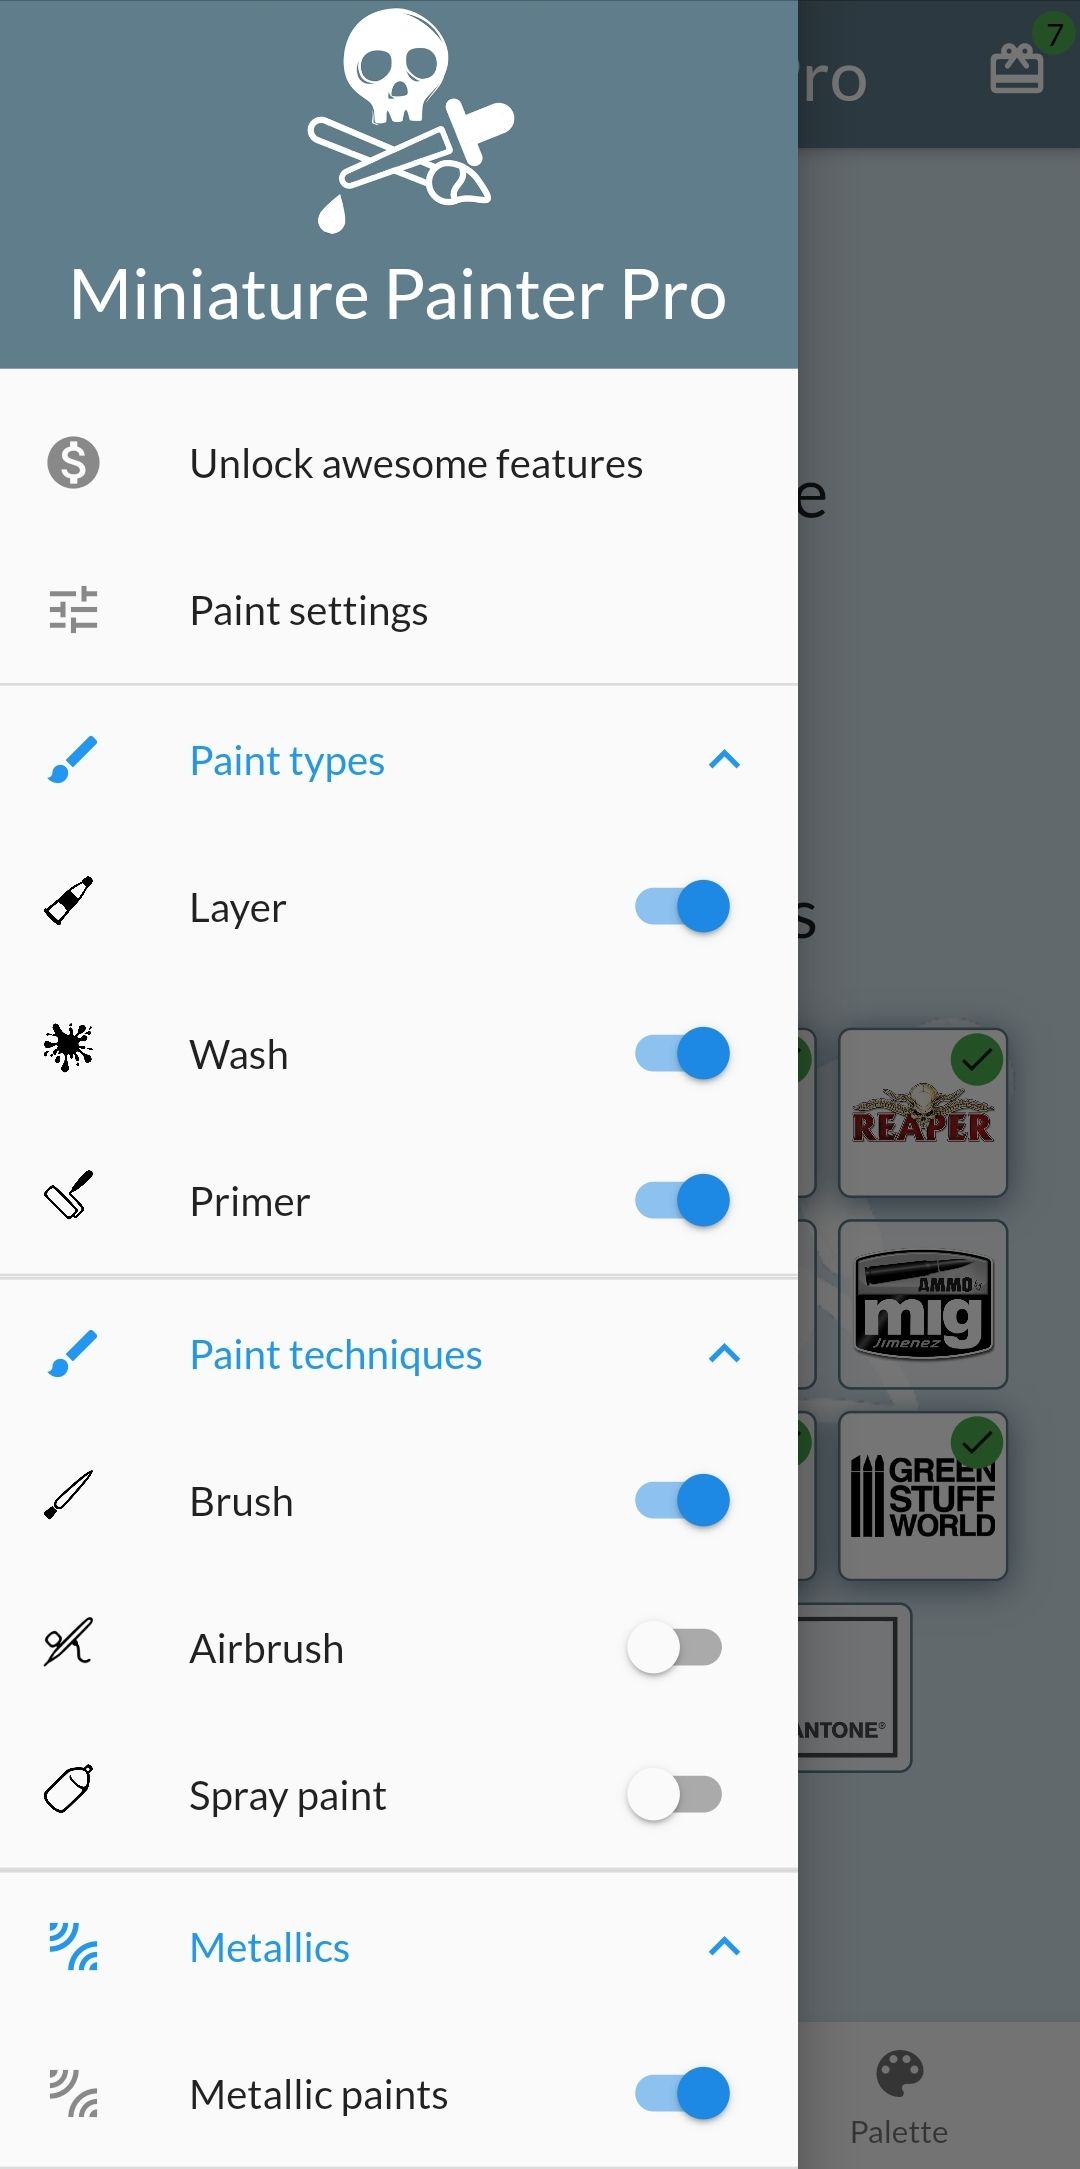 Miniature Painter Pro's menu options let you pick what kind of results you want to see